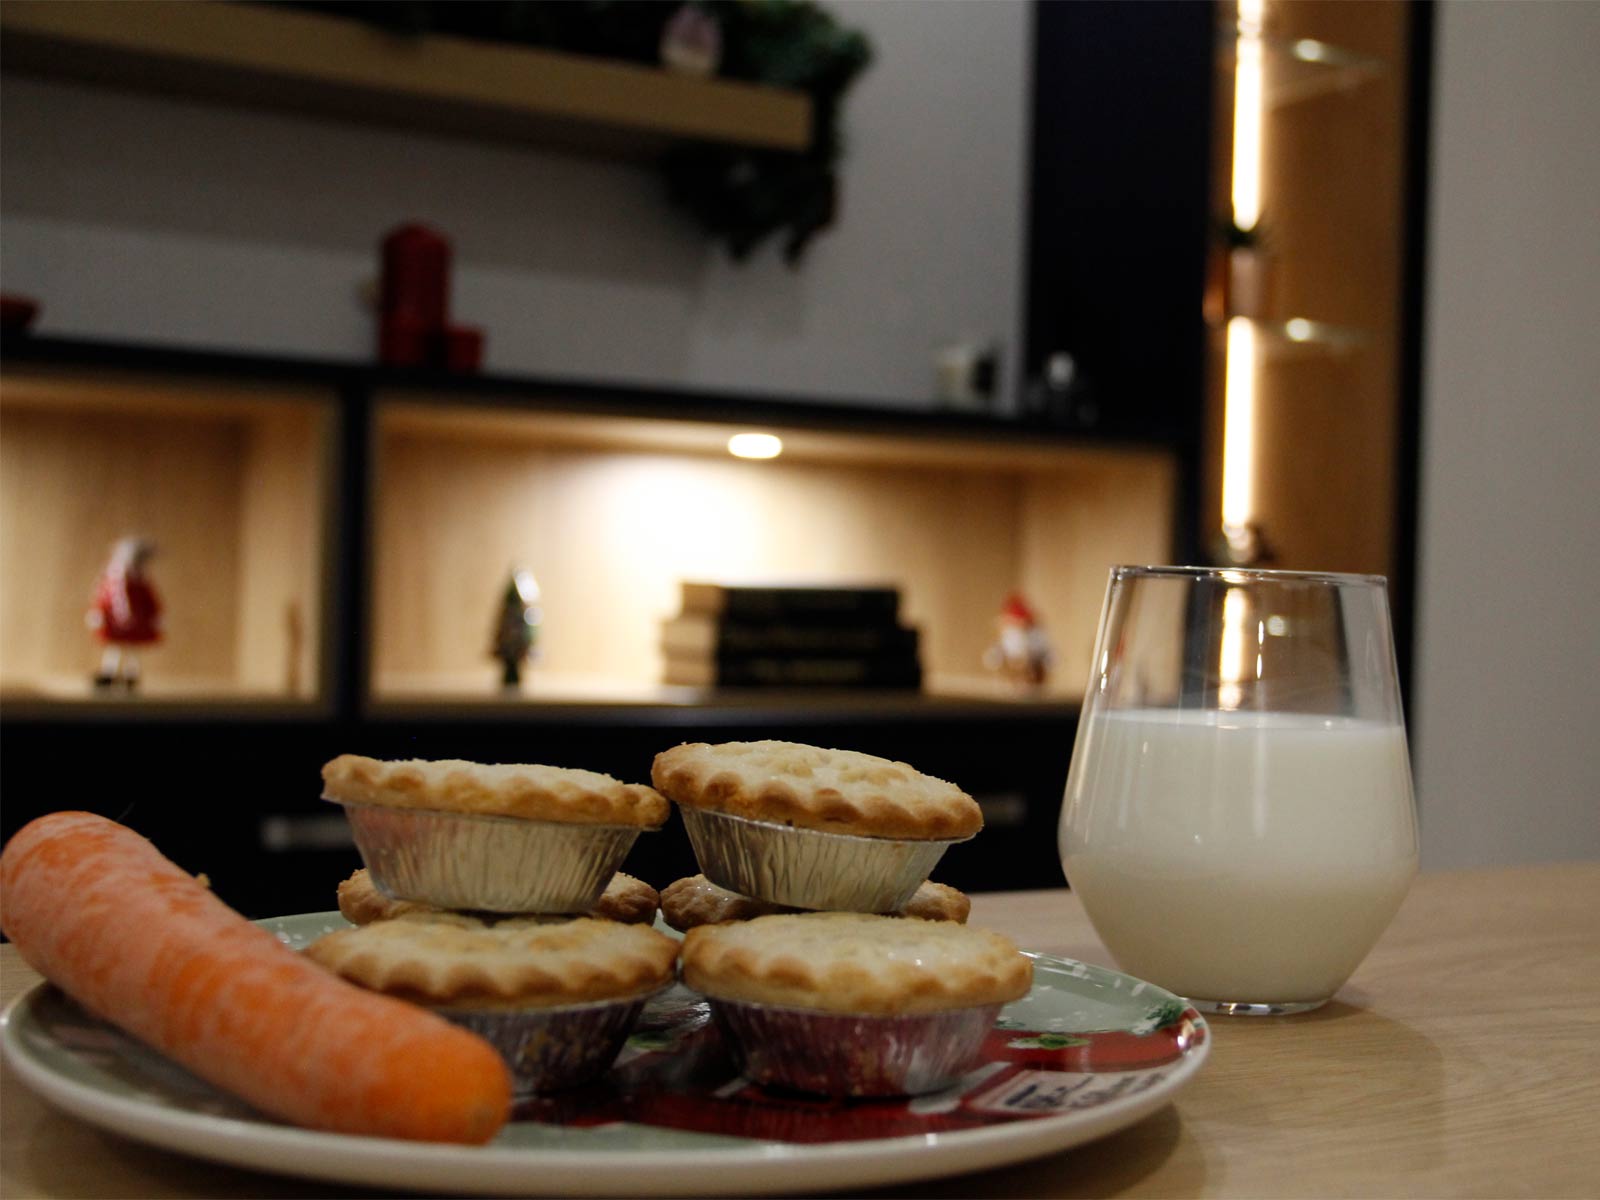 A carrot and mince pies alongside a tumbler of milk on a table